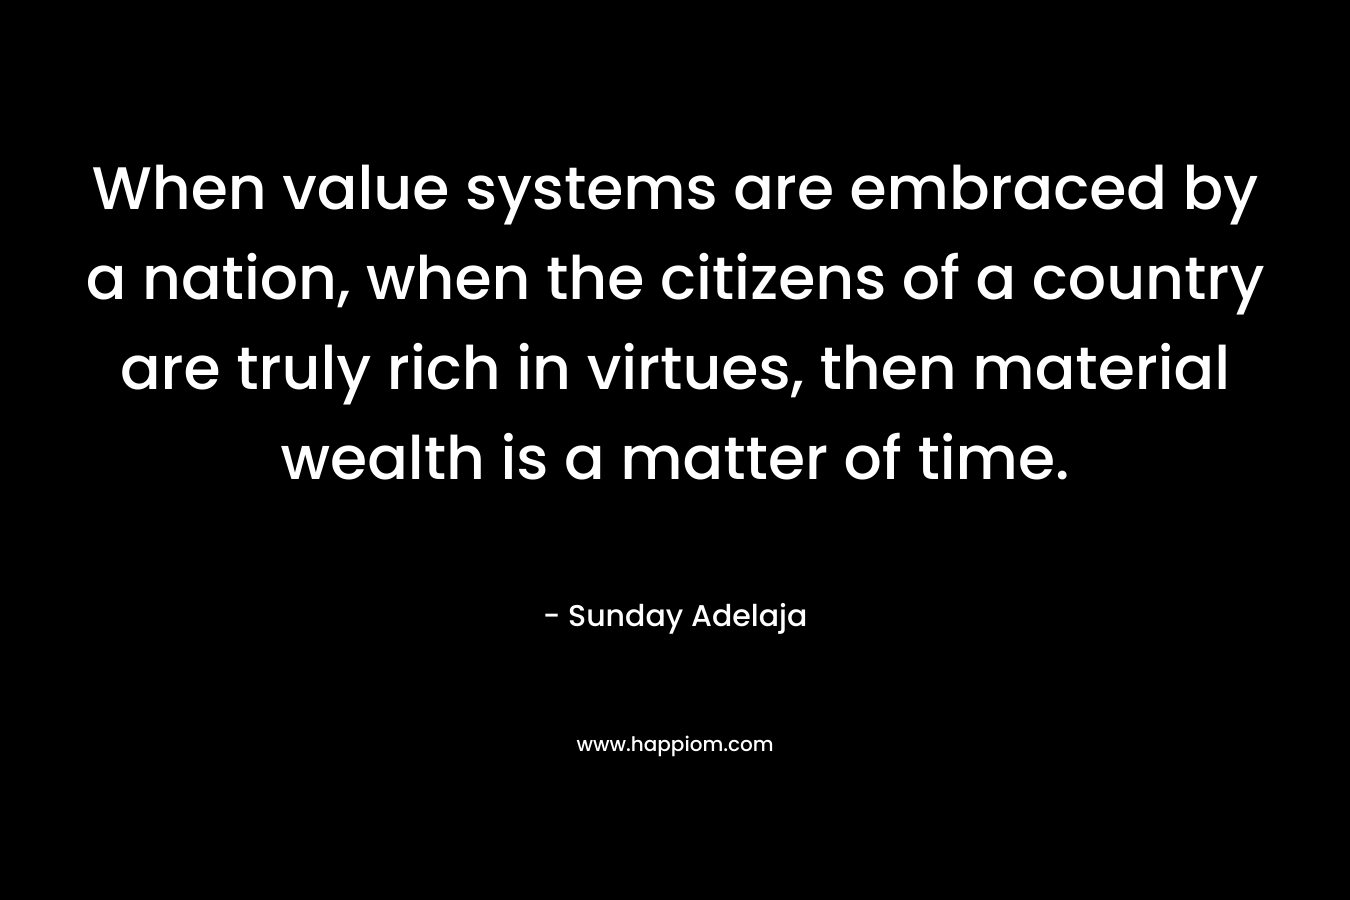 When value systems are embraced by a nation, when the citizens of a country are truly rich in virtues, then material wealth is a matter of time.